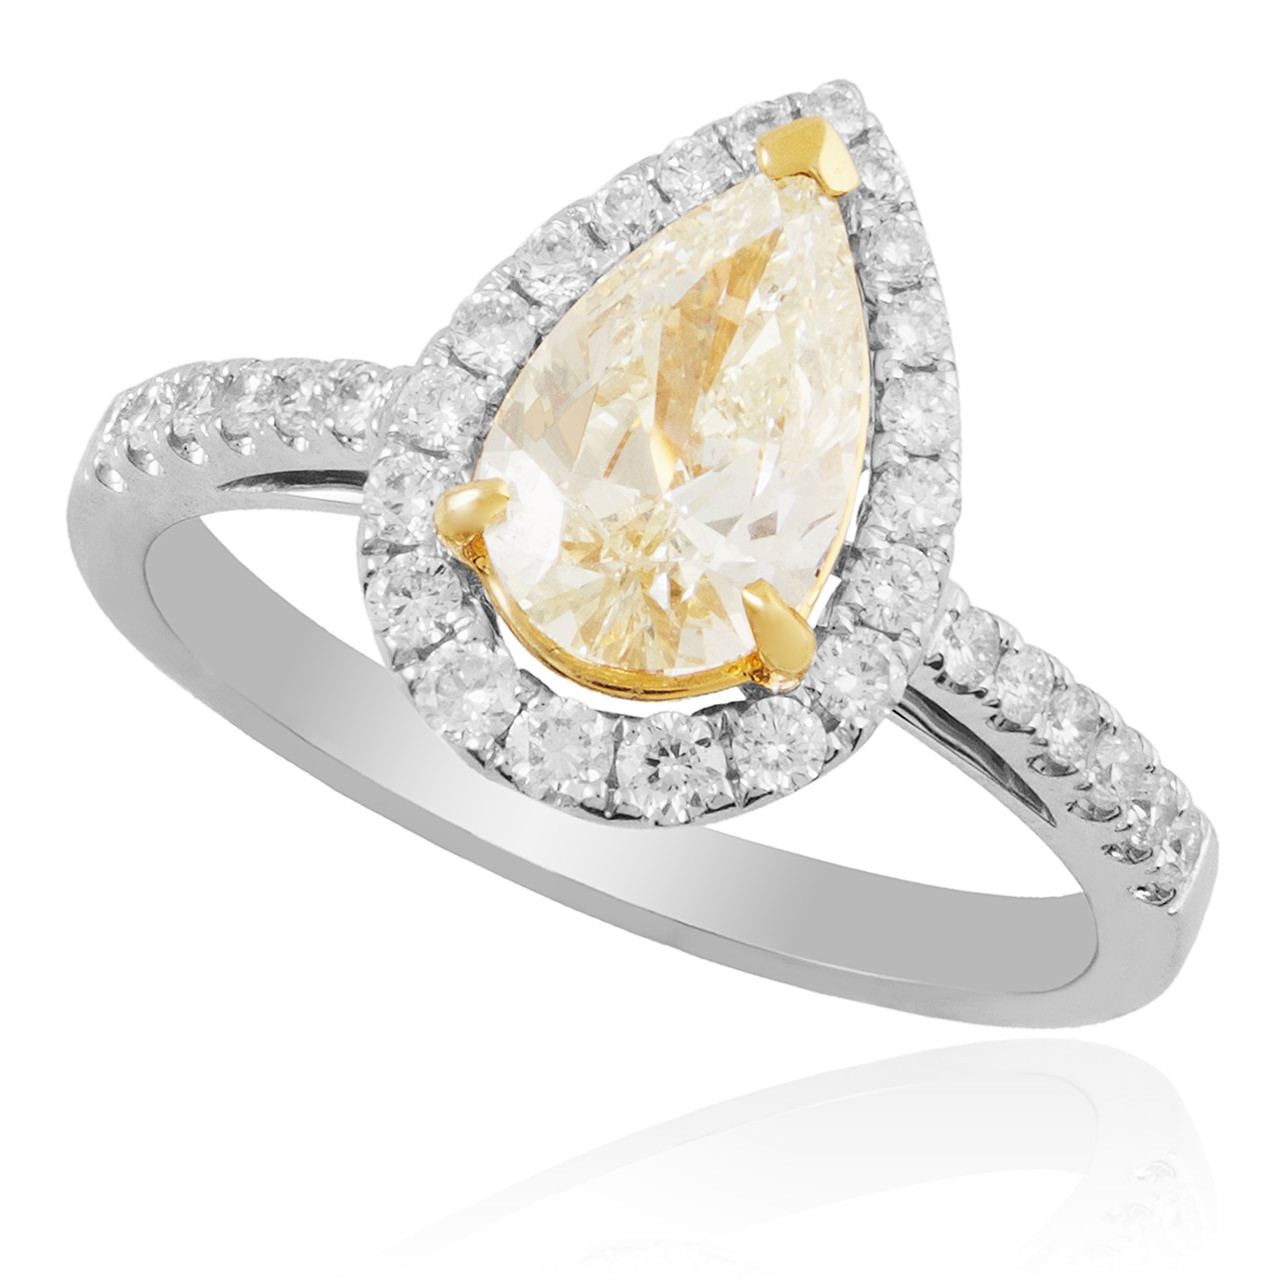 Canary Diamond Engagement Rings
 18K White Gold 1 45ct Pear Shape Canary Diamond Engagement